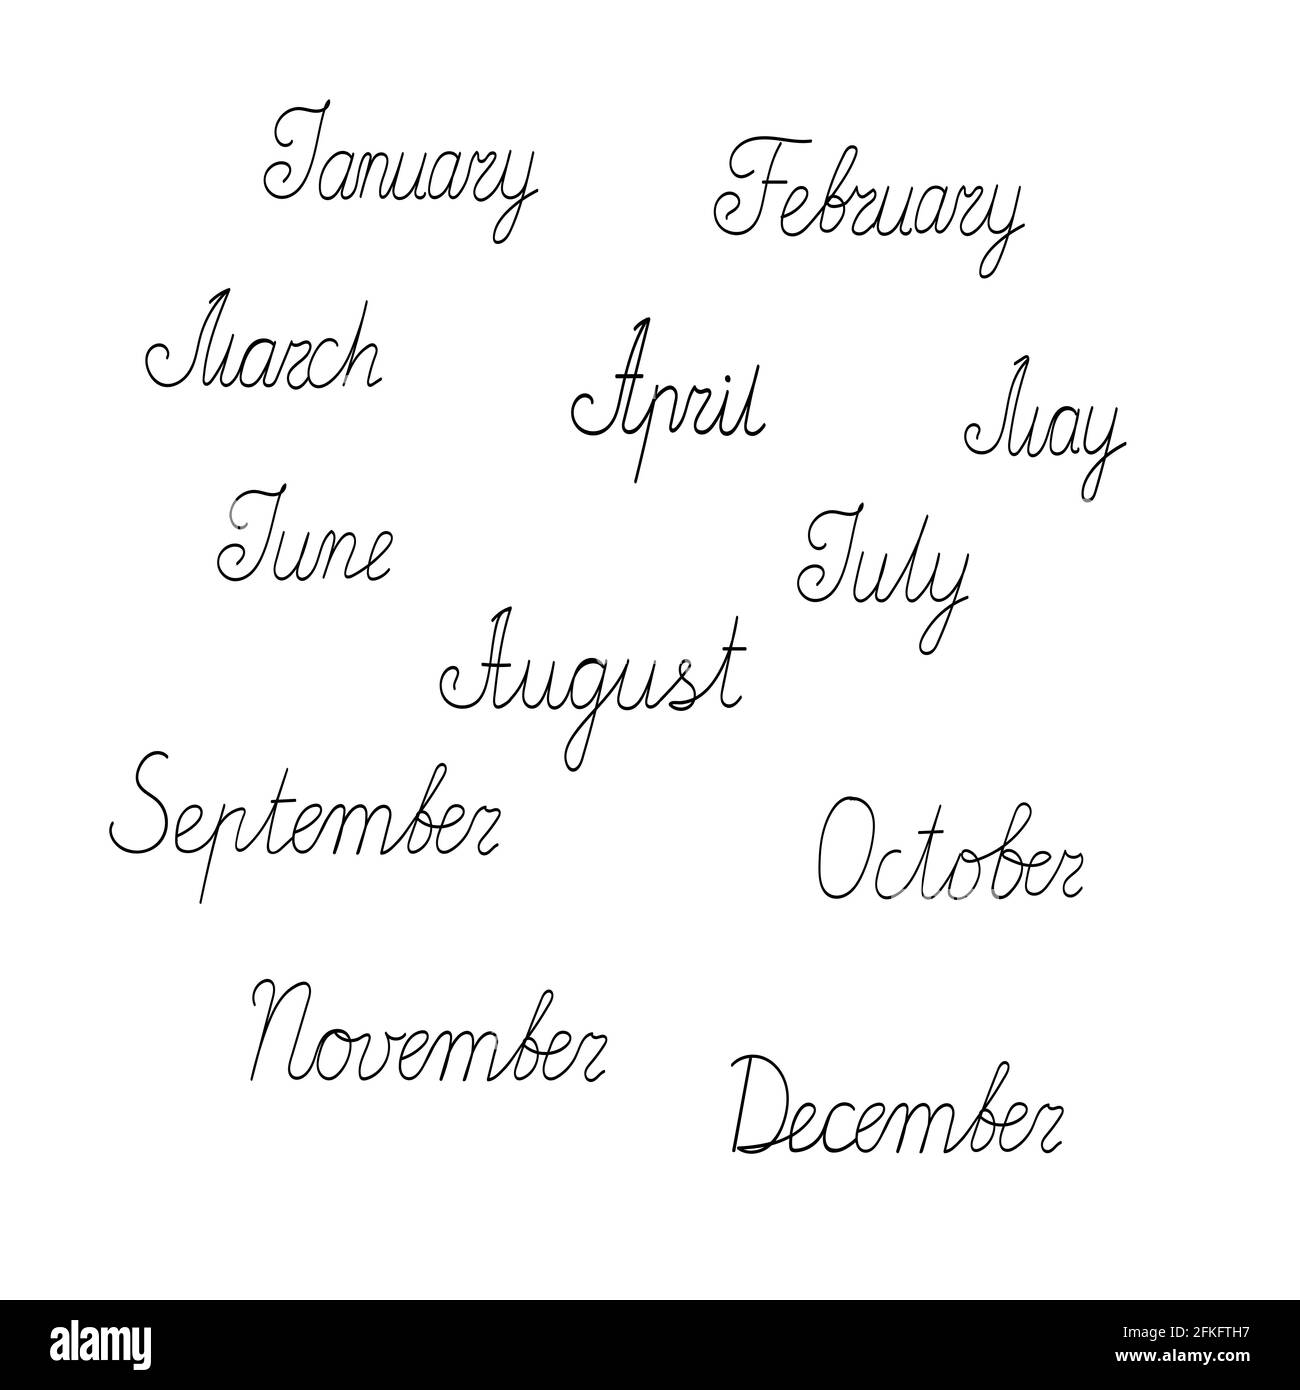 months-of-the-year-names-set-hand-drawn-vector-illustration